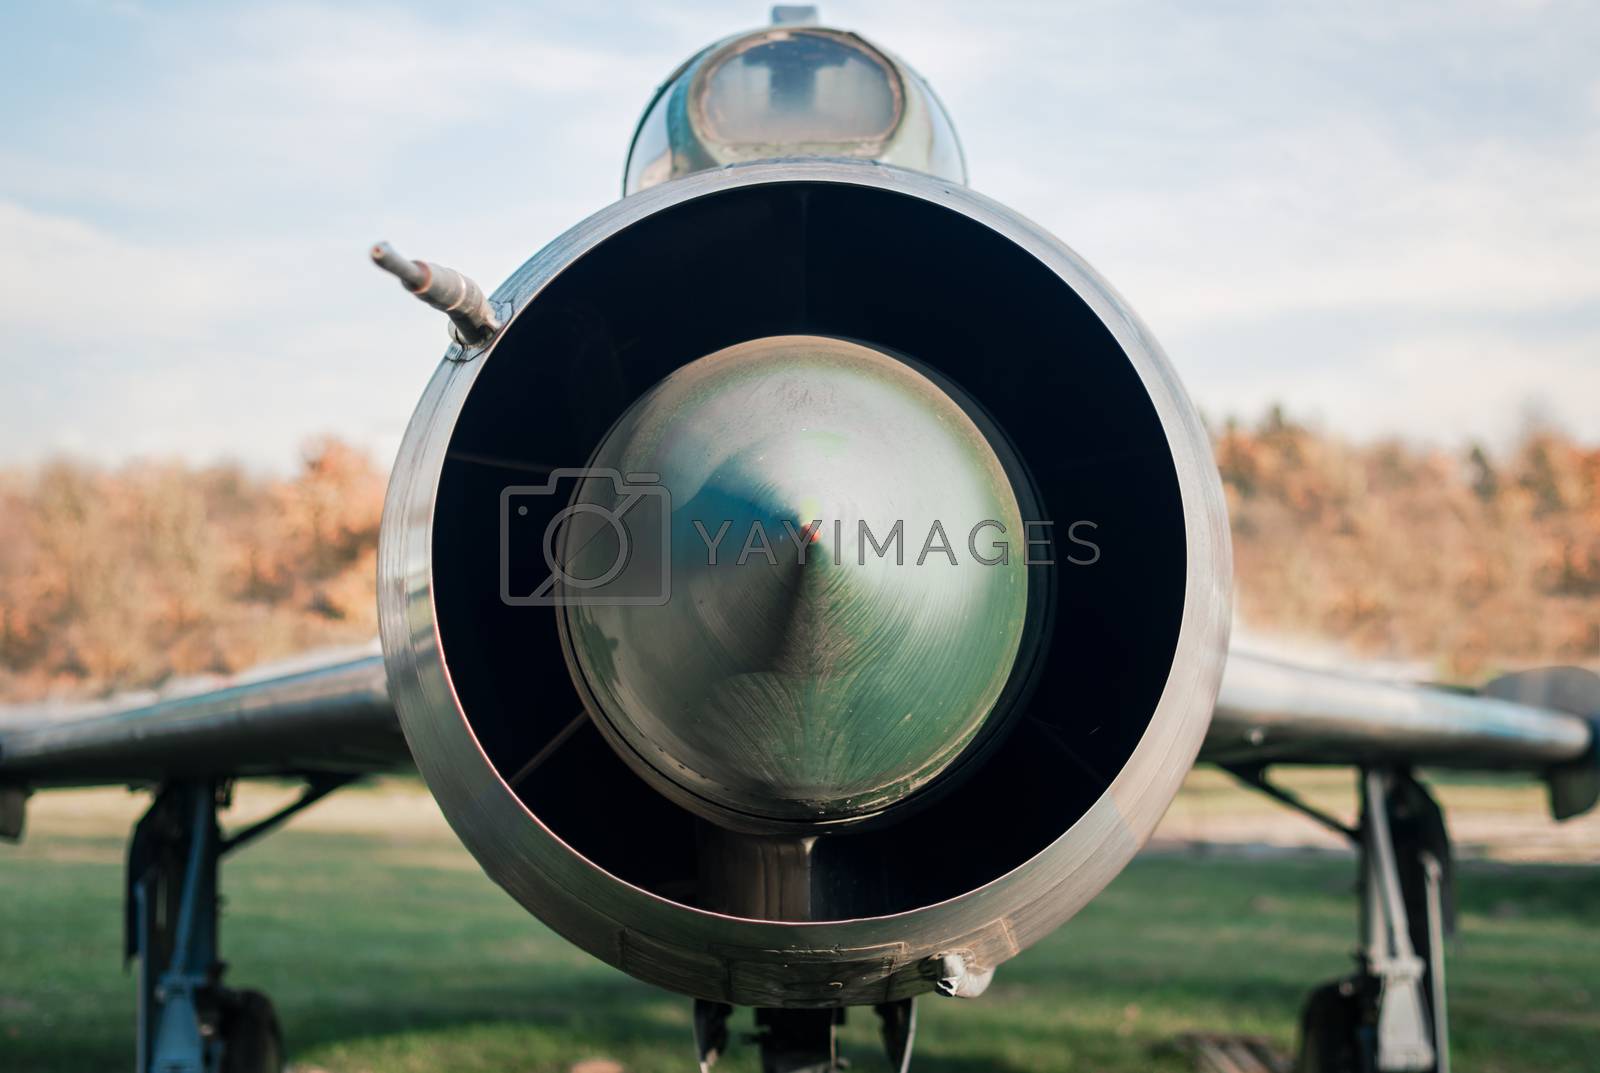 Royalty free image of old army military combat fighter plane close up by Gera8th